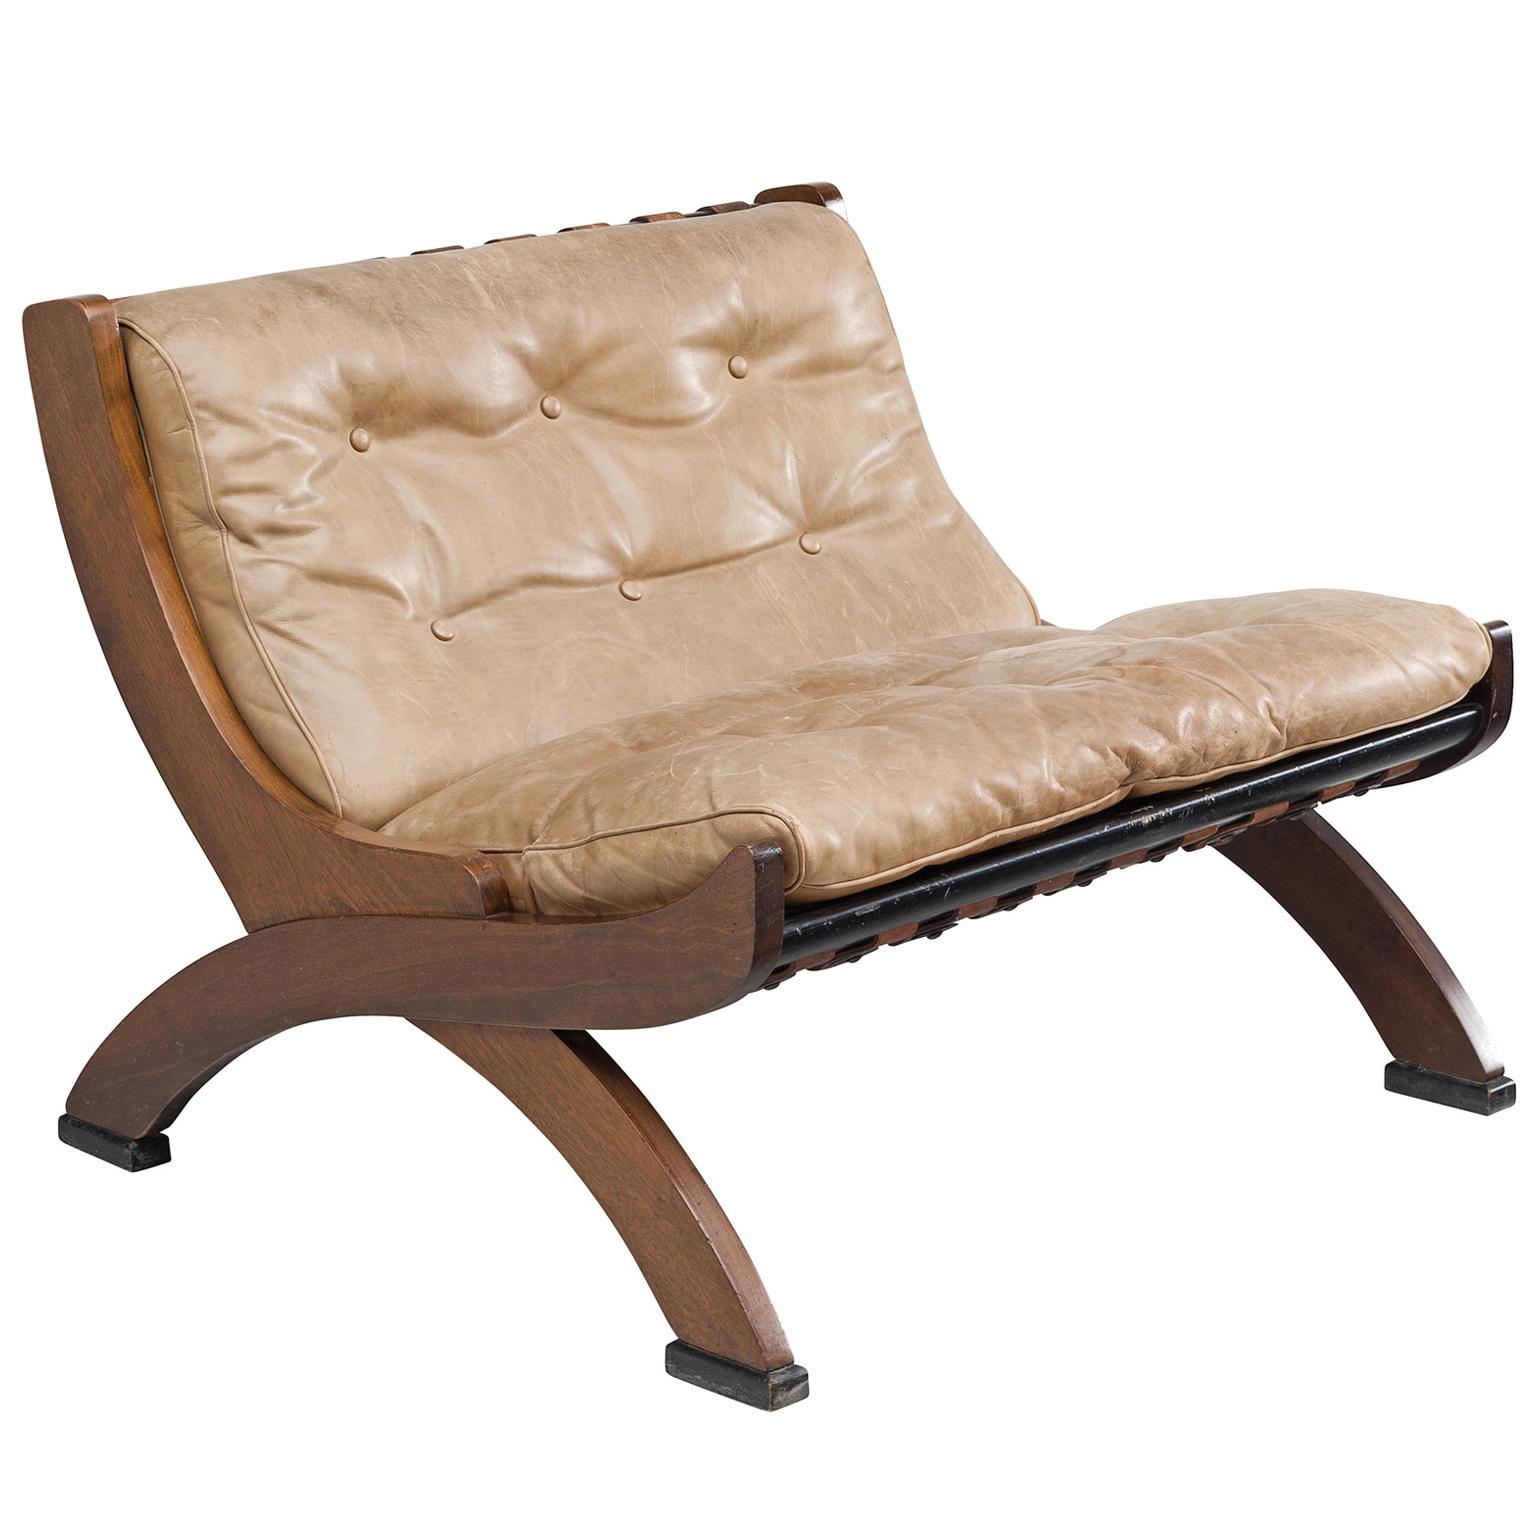 M. Comolli Lounge Chair in Walnut and a Light Brown Leather